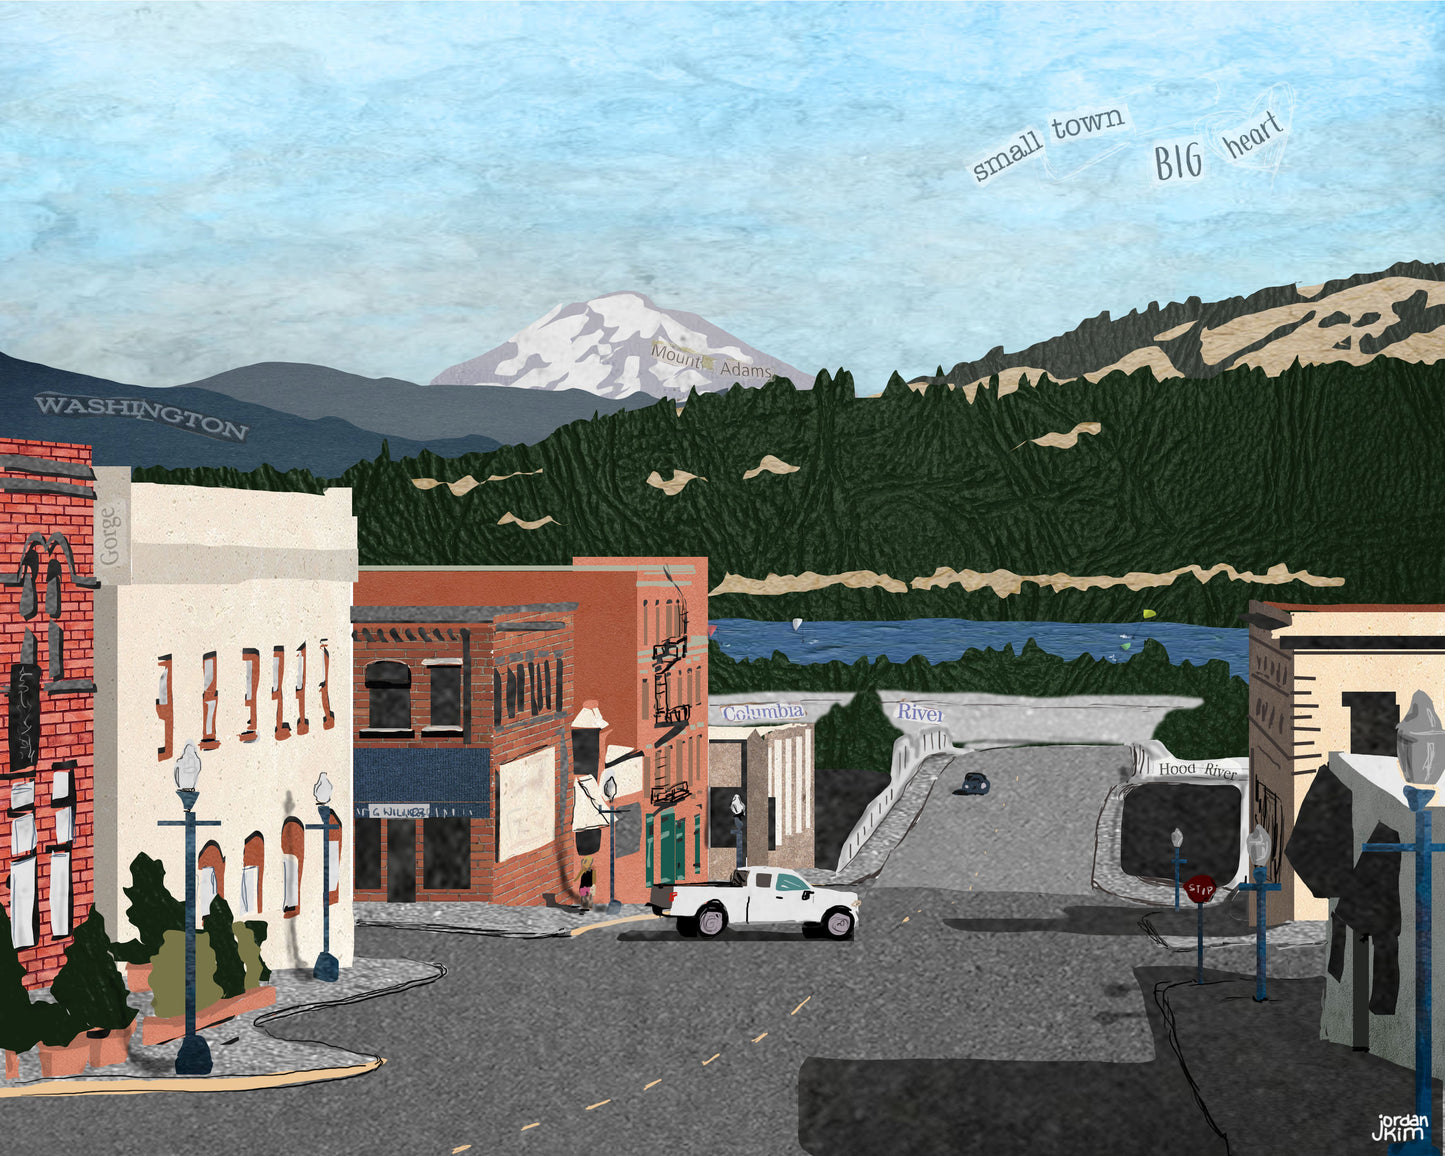 Greeting Card of mixed media collage of downtown Hood River, Oregon, Columbia River Gorge, small town- Blank Inside